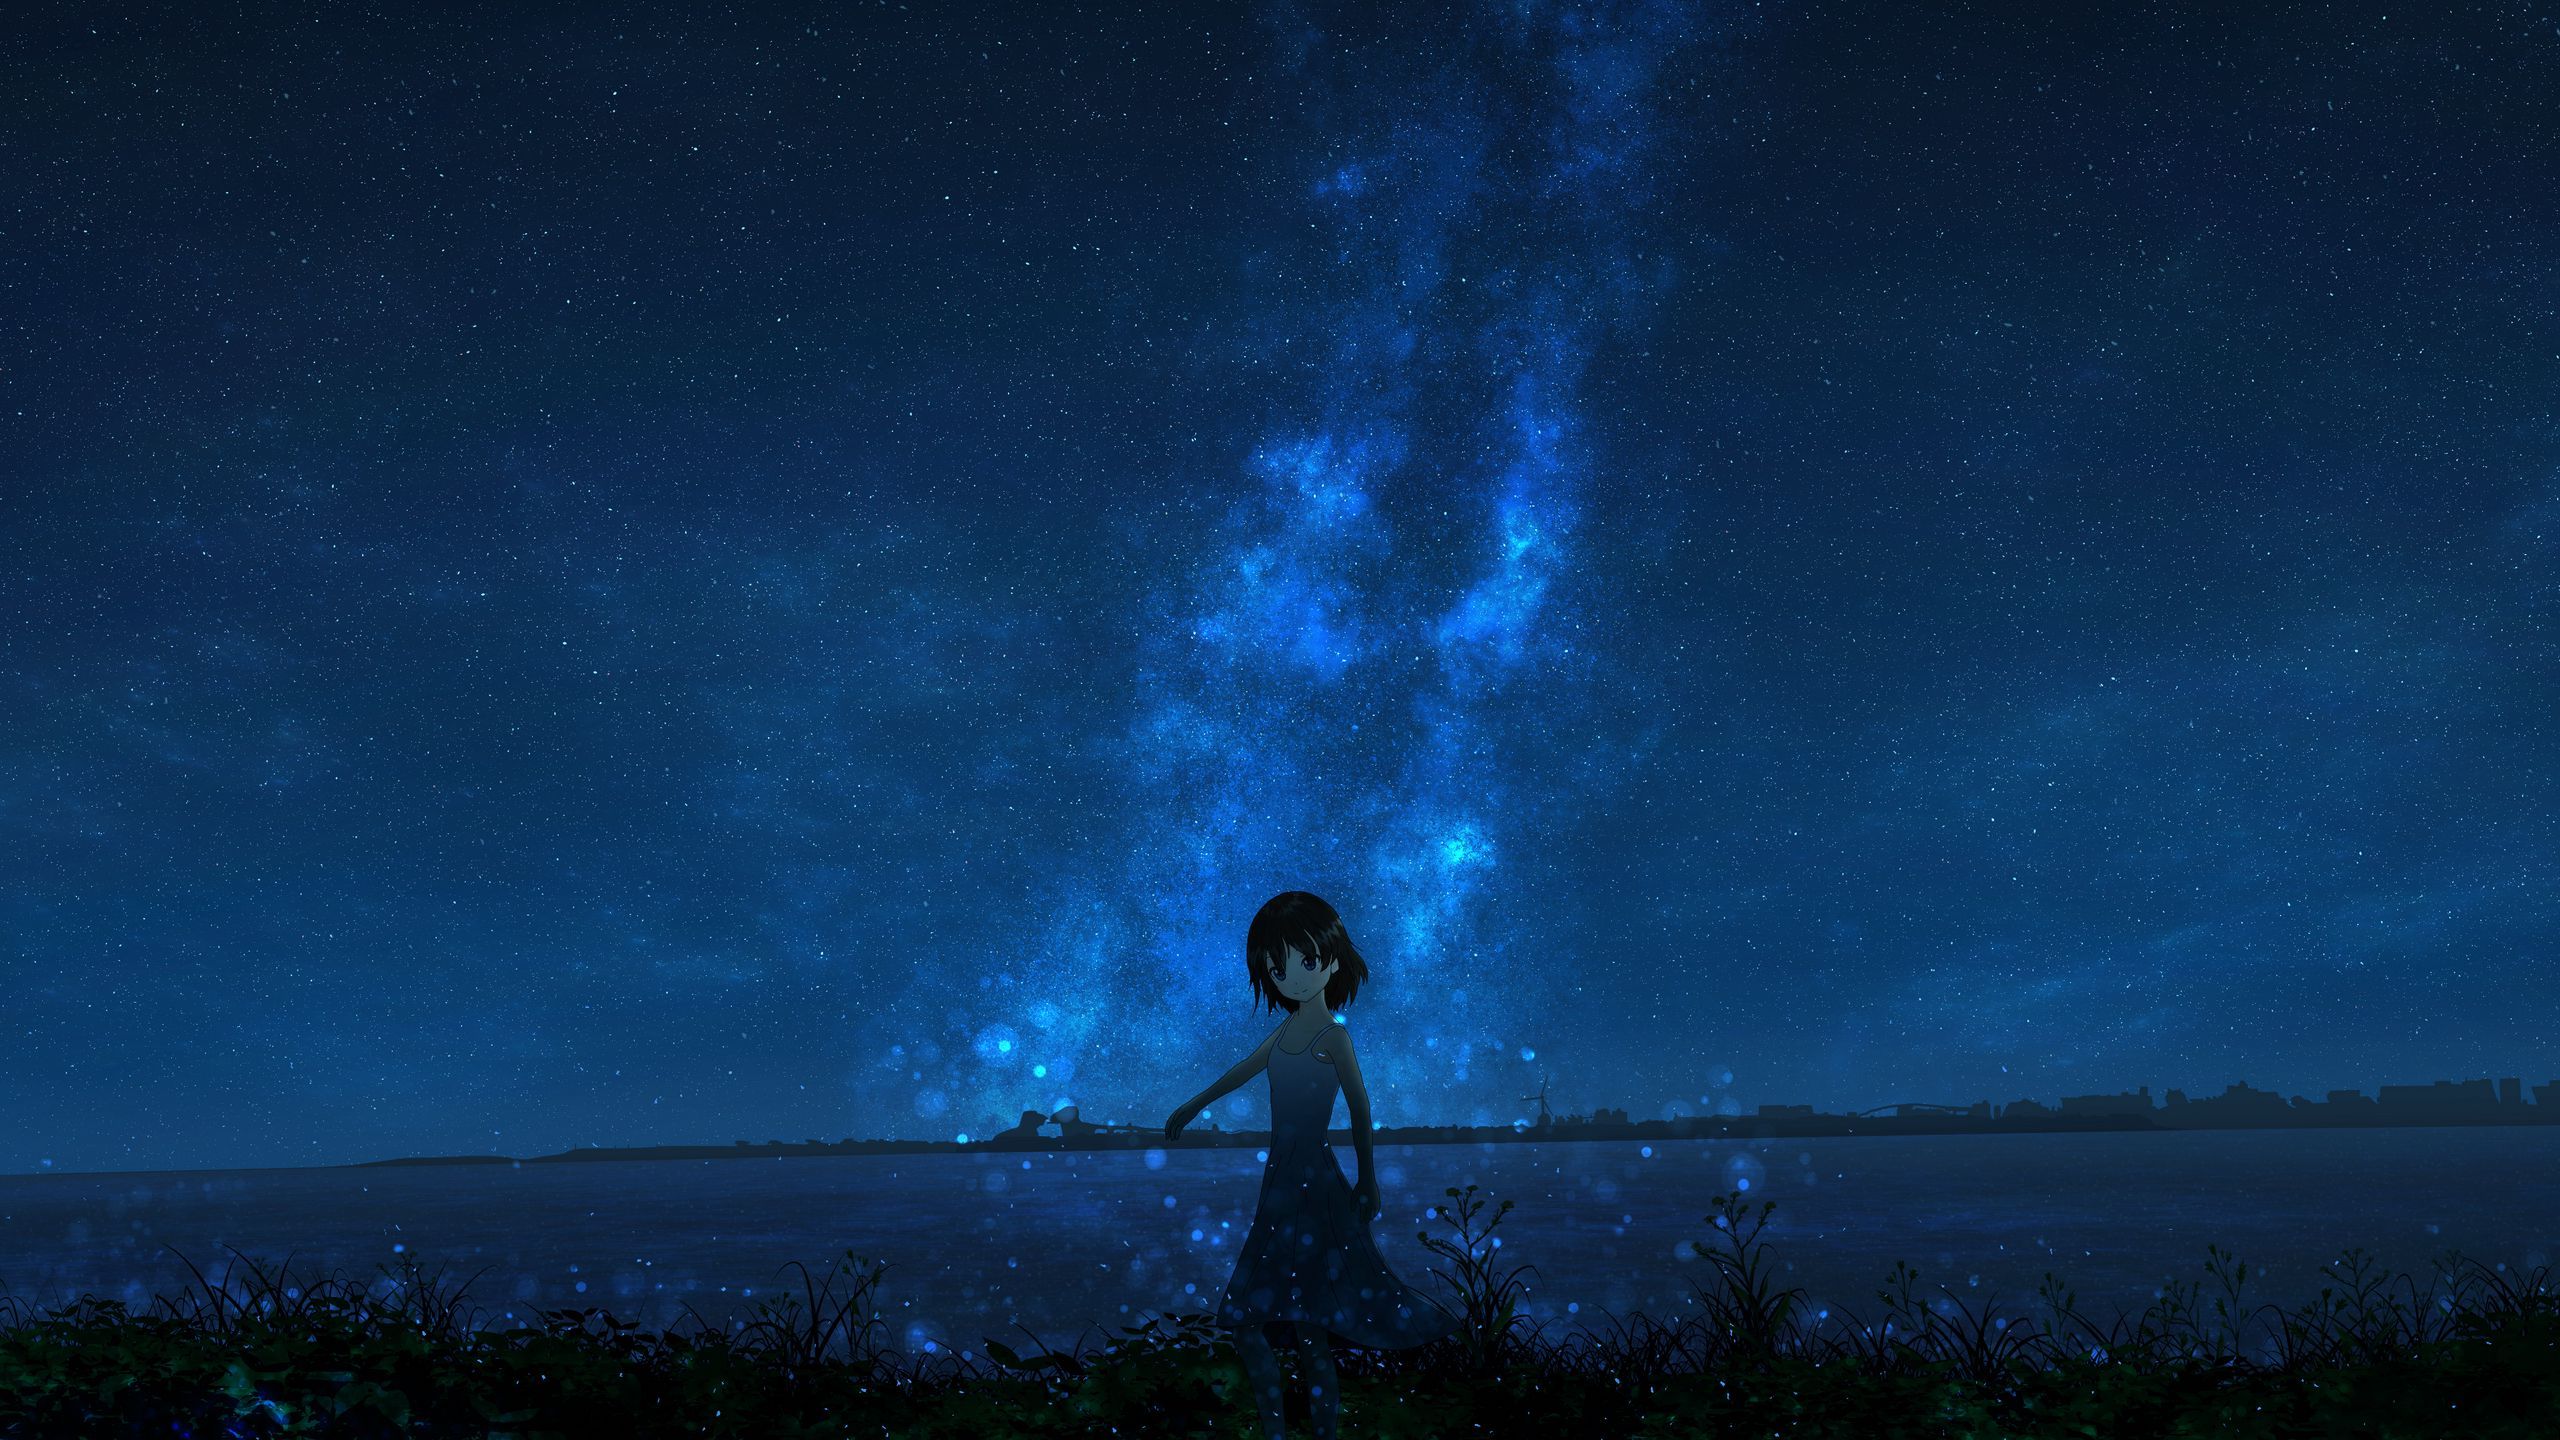 Download wallpaper 2560x1440 girl, night, starry sky, anime widescreen 16:9 HD background